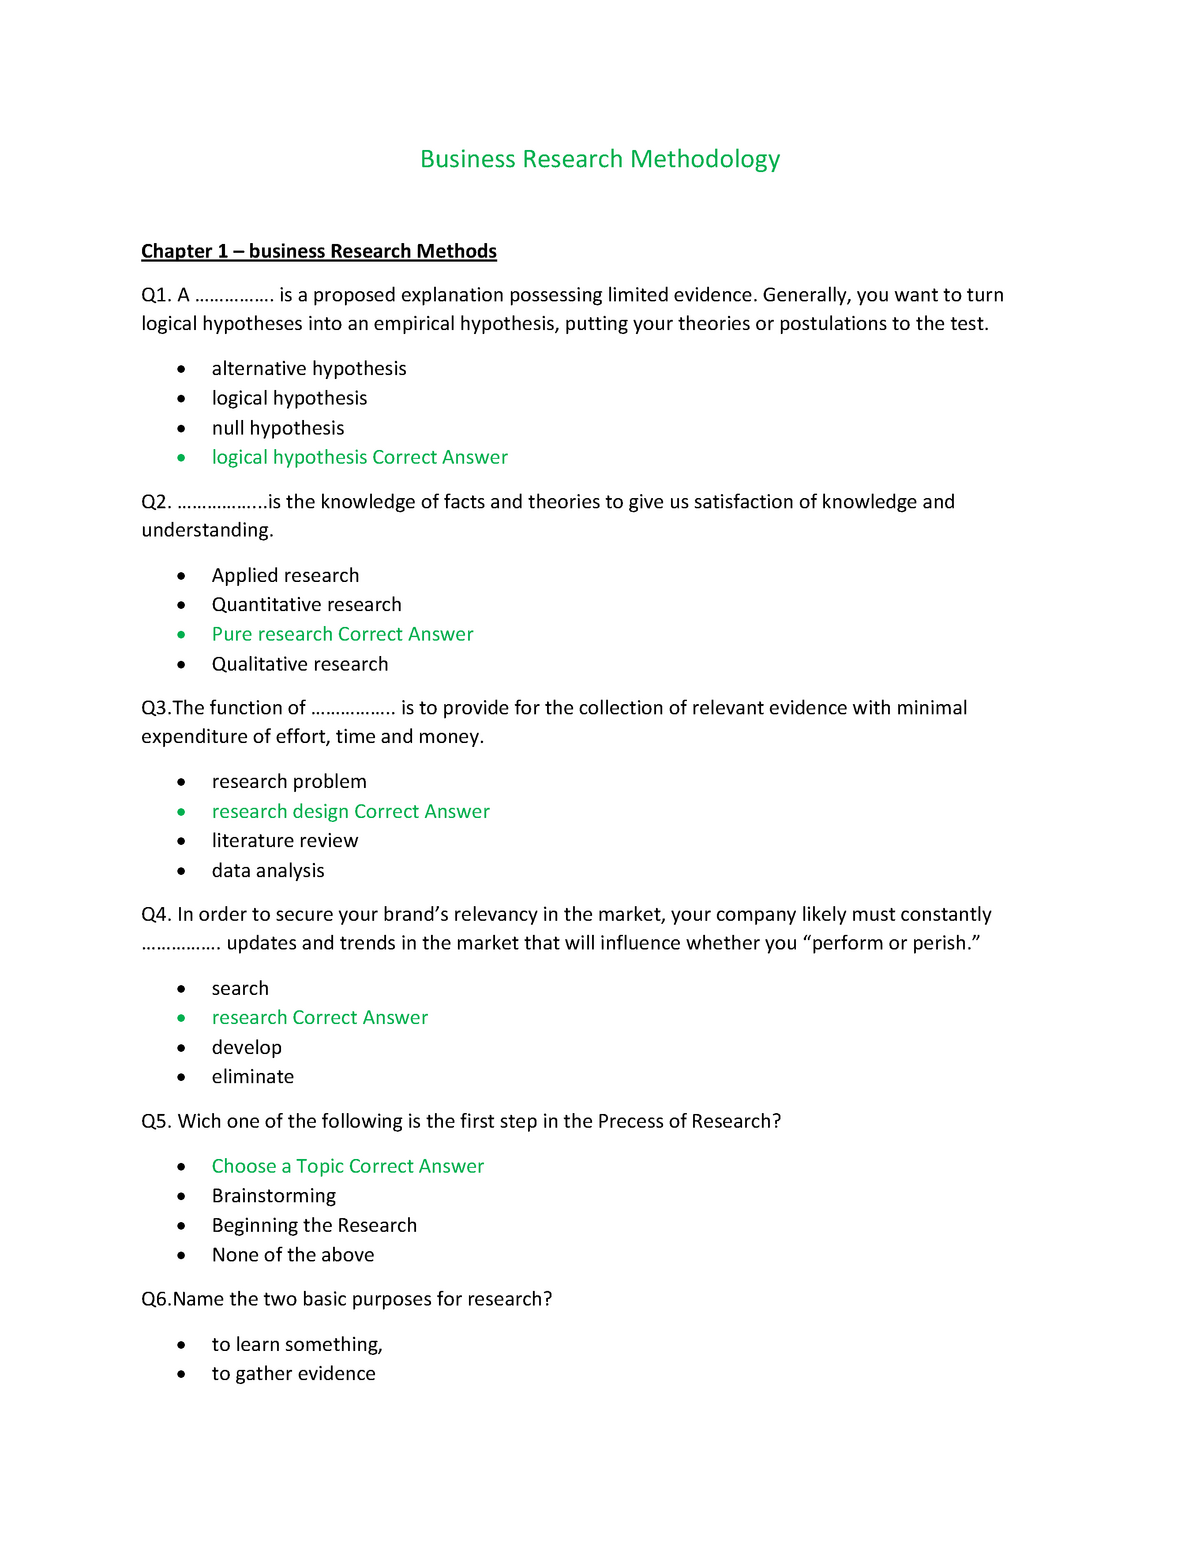 qualitative research exam questions and answers pdf